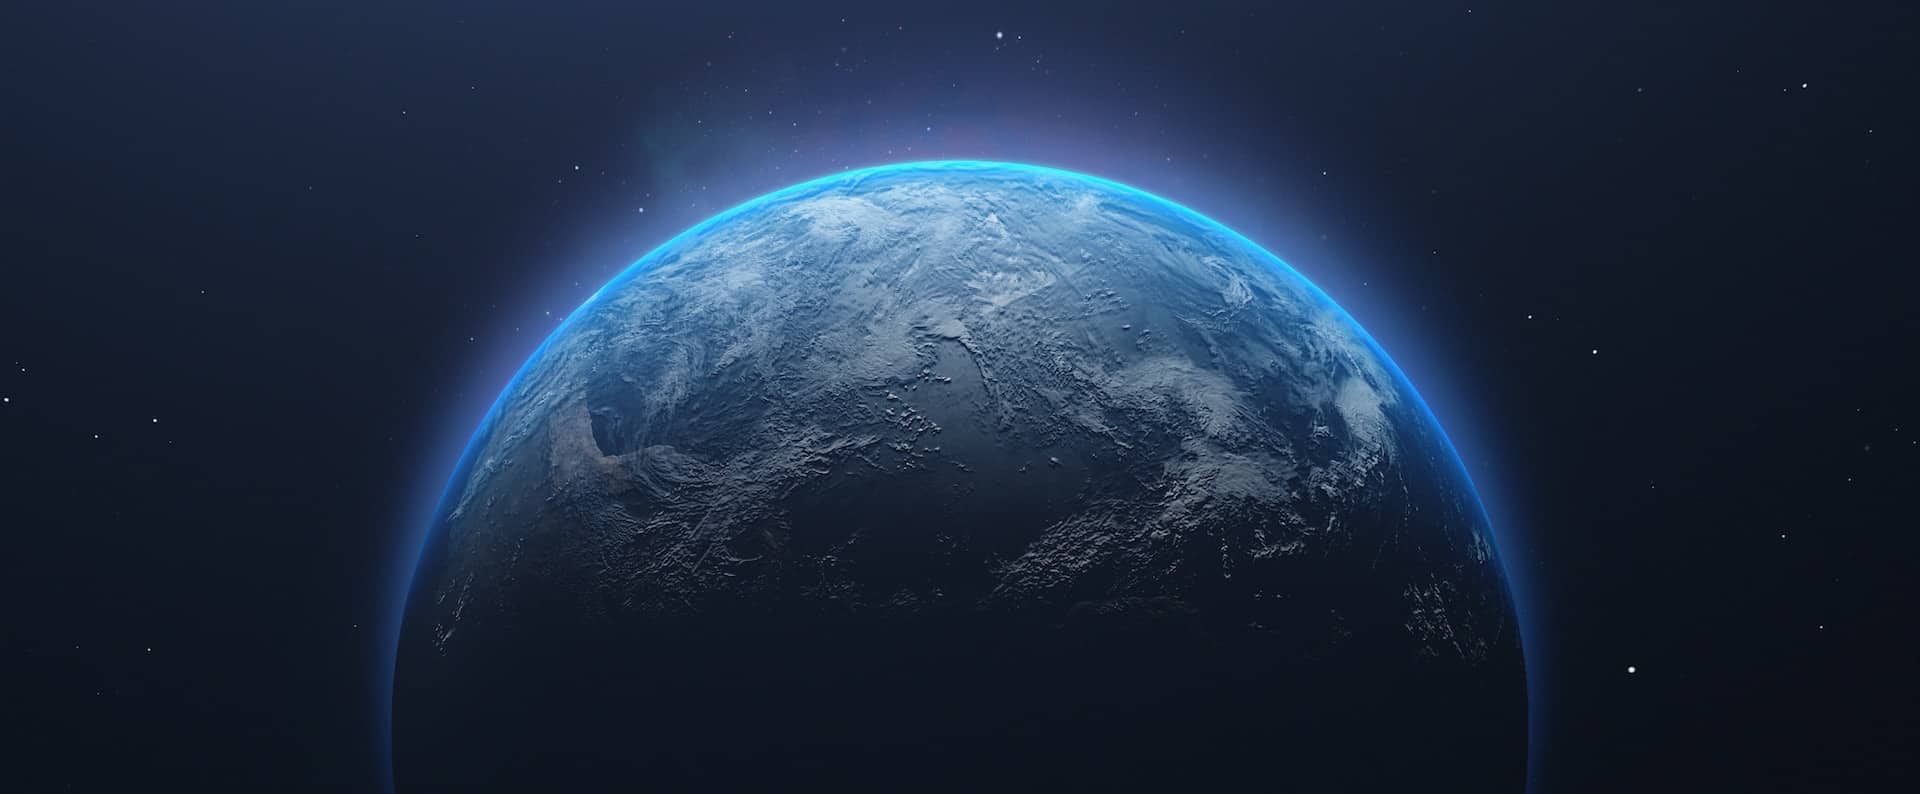 A distant view of an emerging Earth in space, representative of a new world.